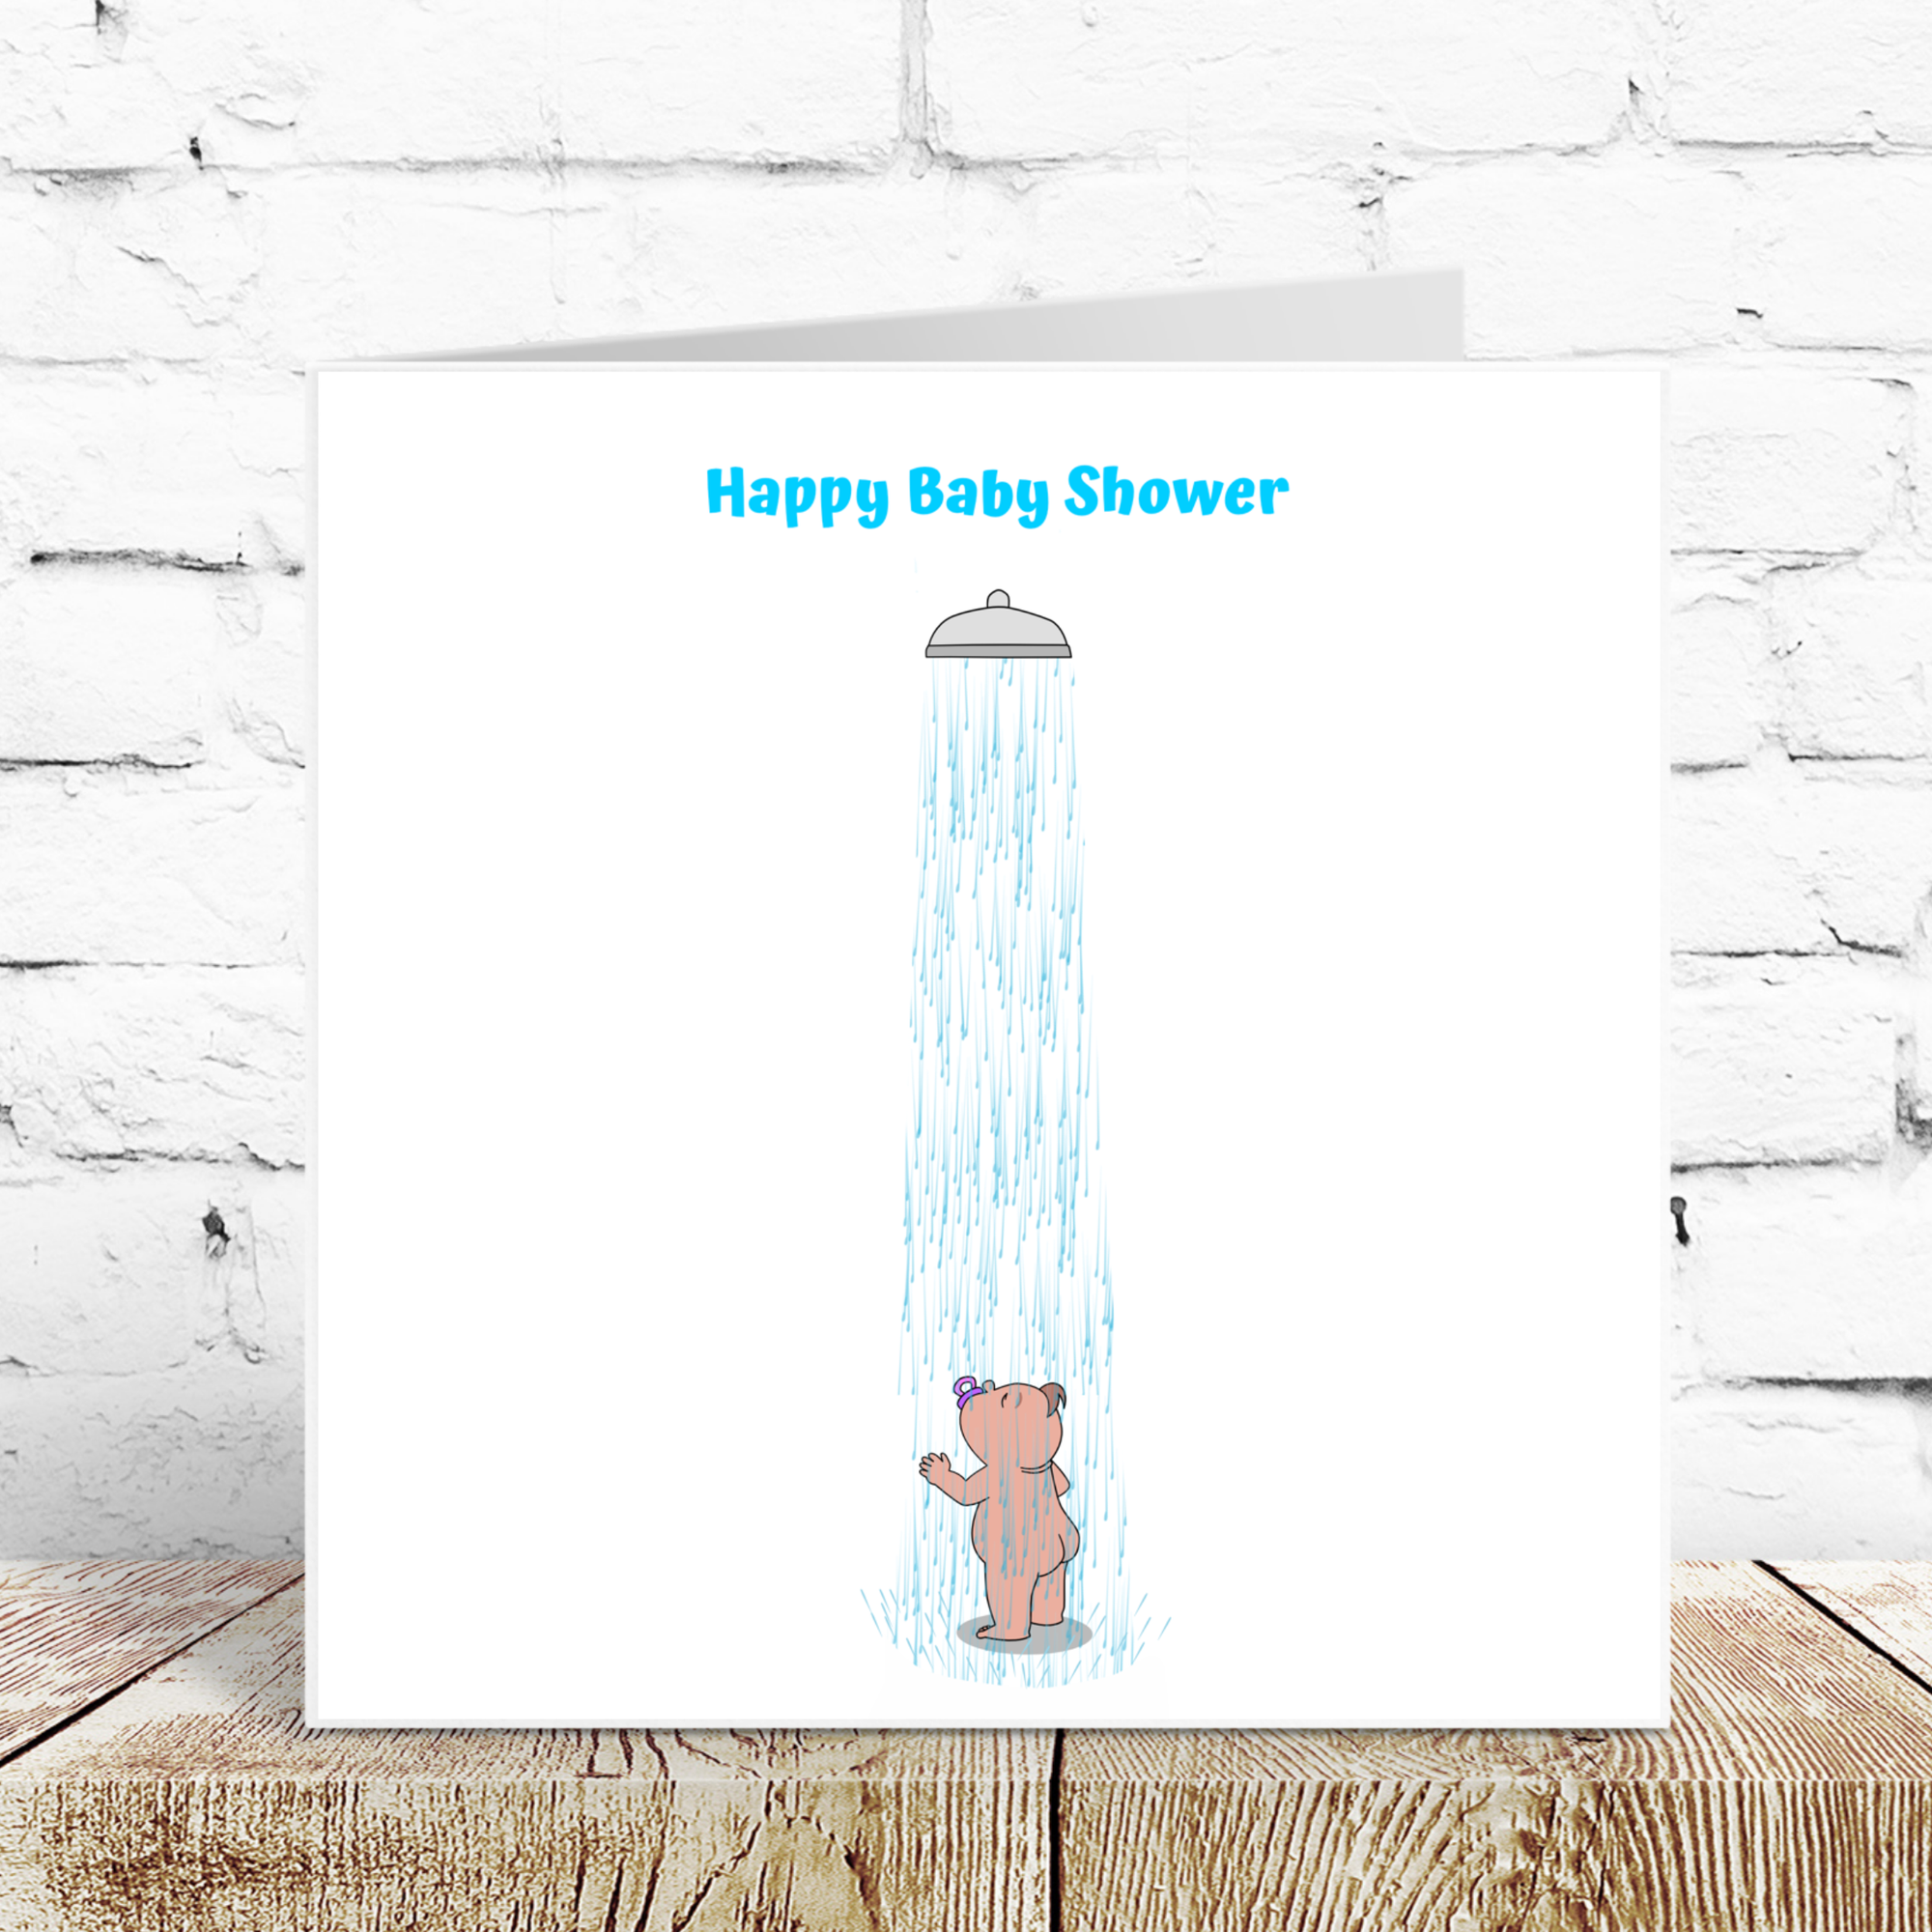 Funny Baby Shower Card New Baby Congratulations Party Cute Cheeky Sweet